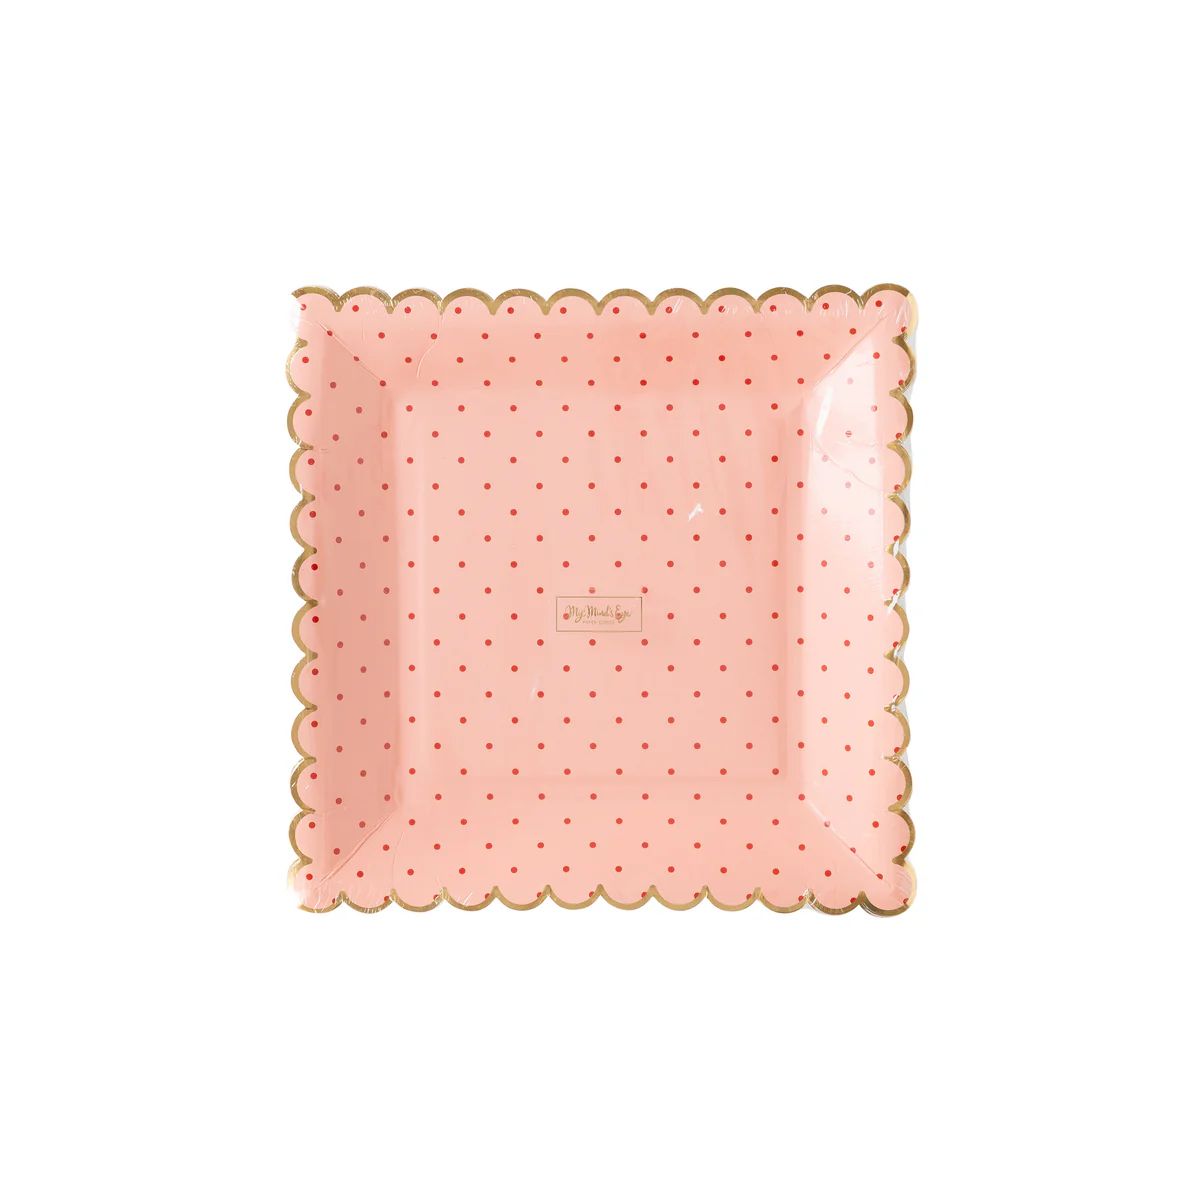 Pink With Polka Dot Scallop Plate | My Mind's Eye